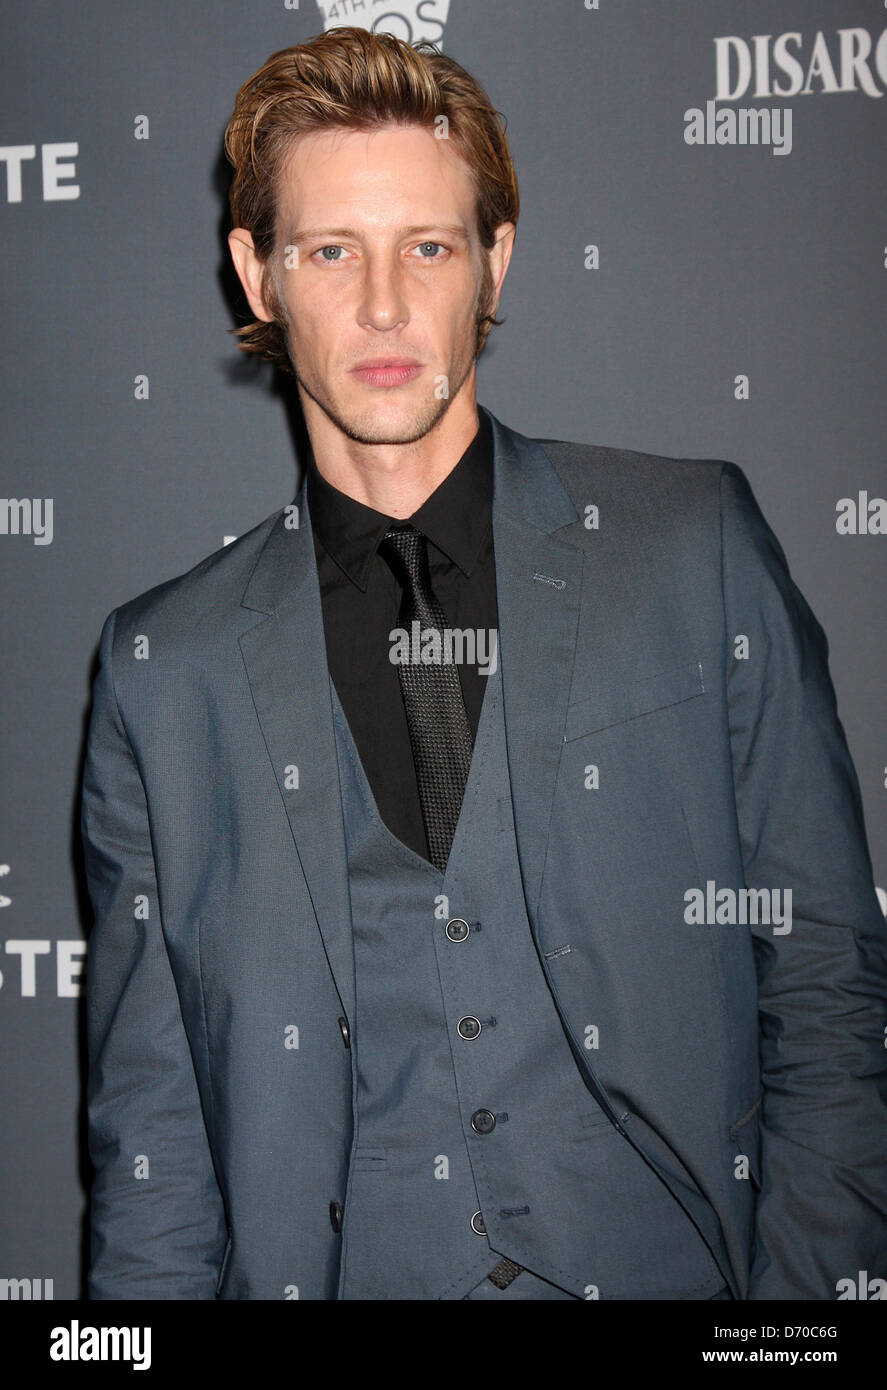 Gabriel Mann The 14th Annual Costume Designers Guild Awards at the Beverly Hilton Hotel Los Angeles, California, USA - 21.02.12 Stock Photo